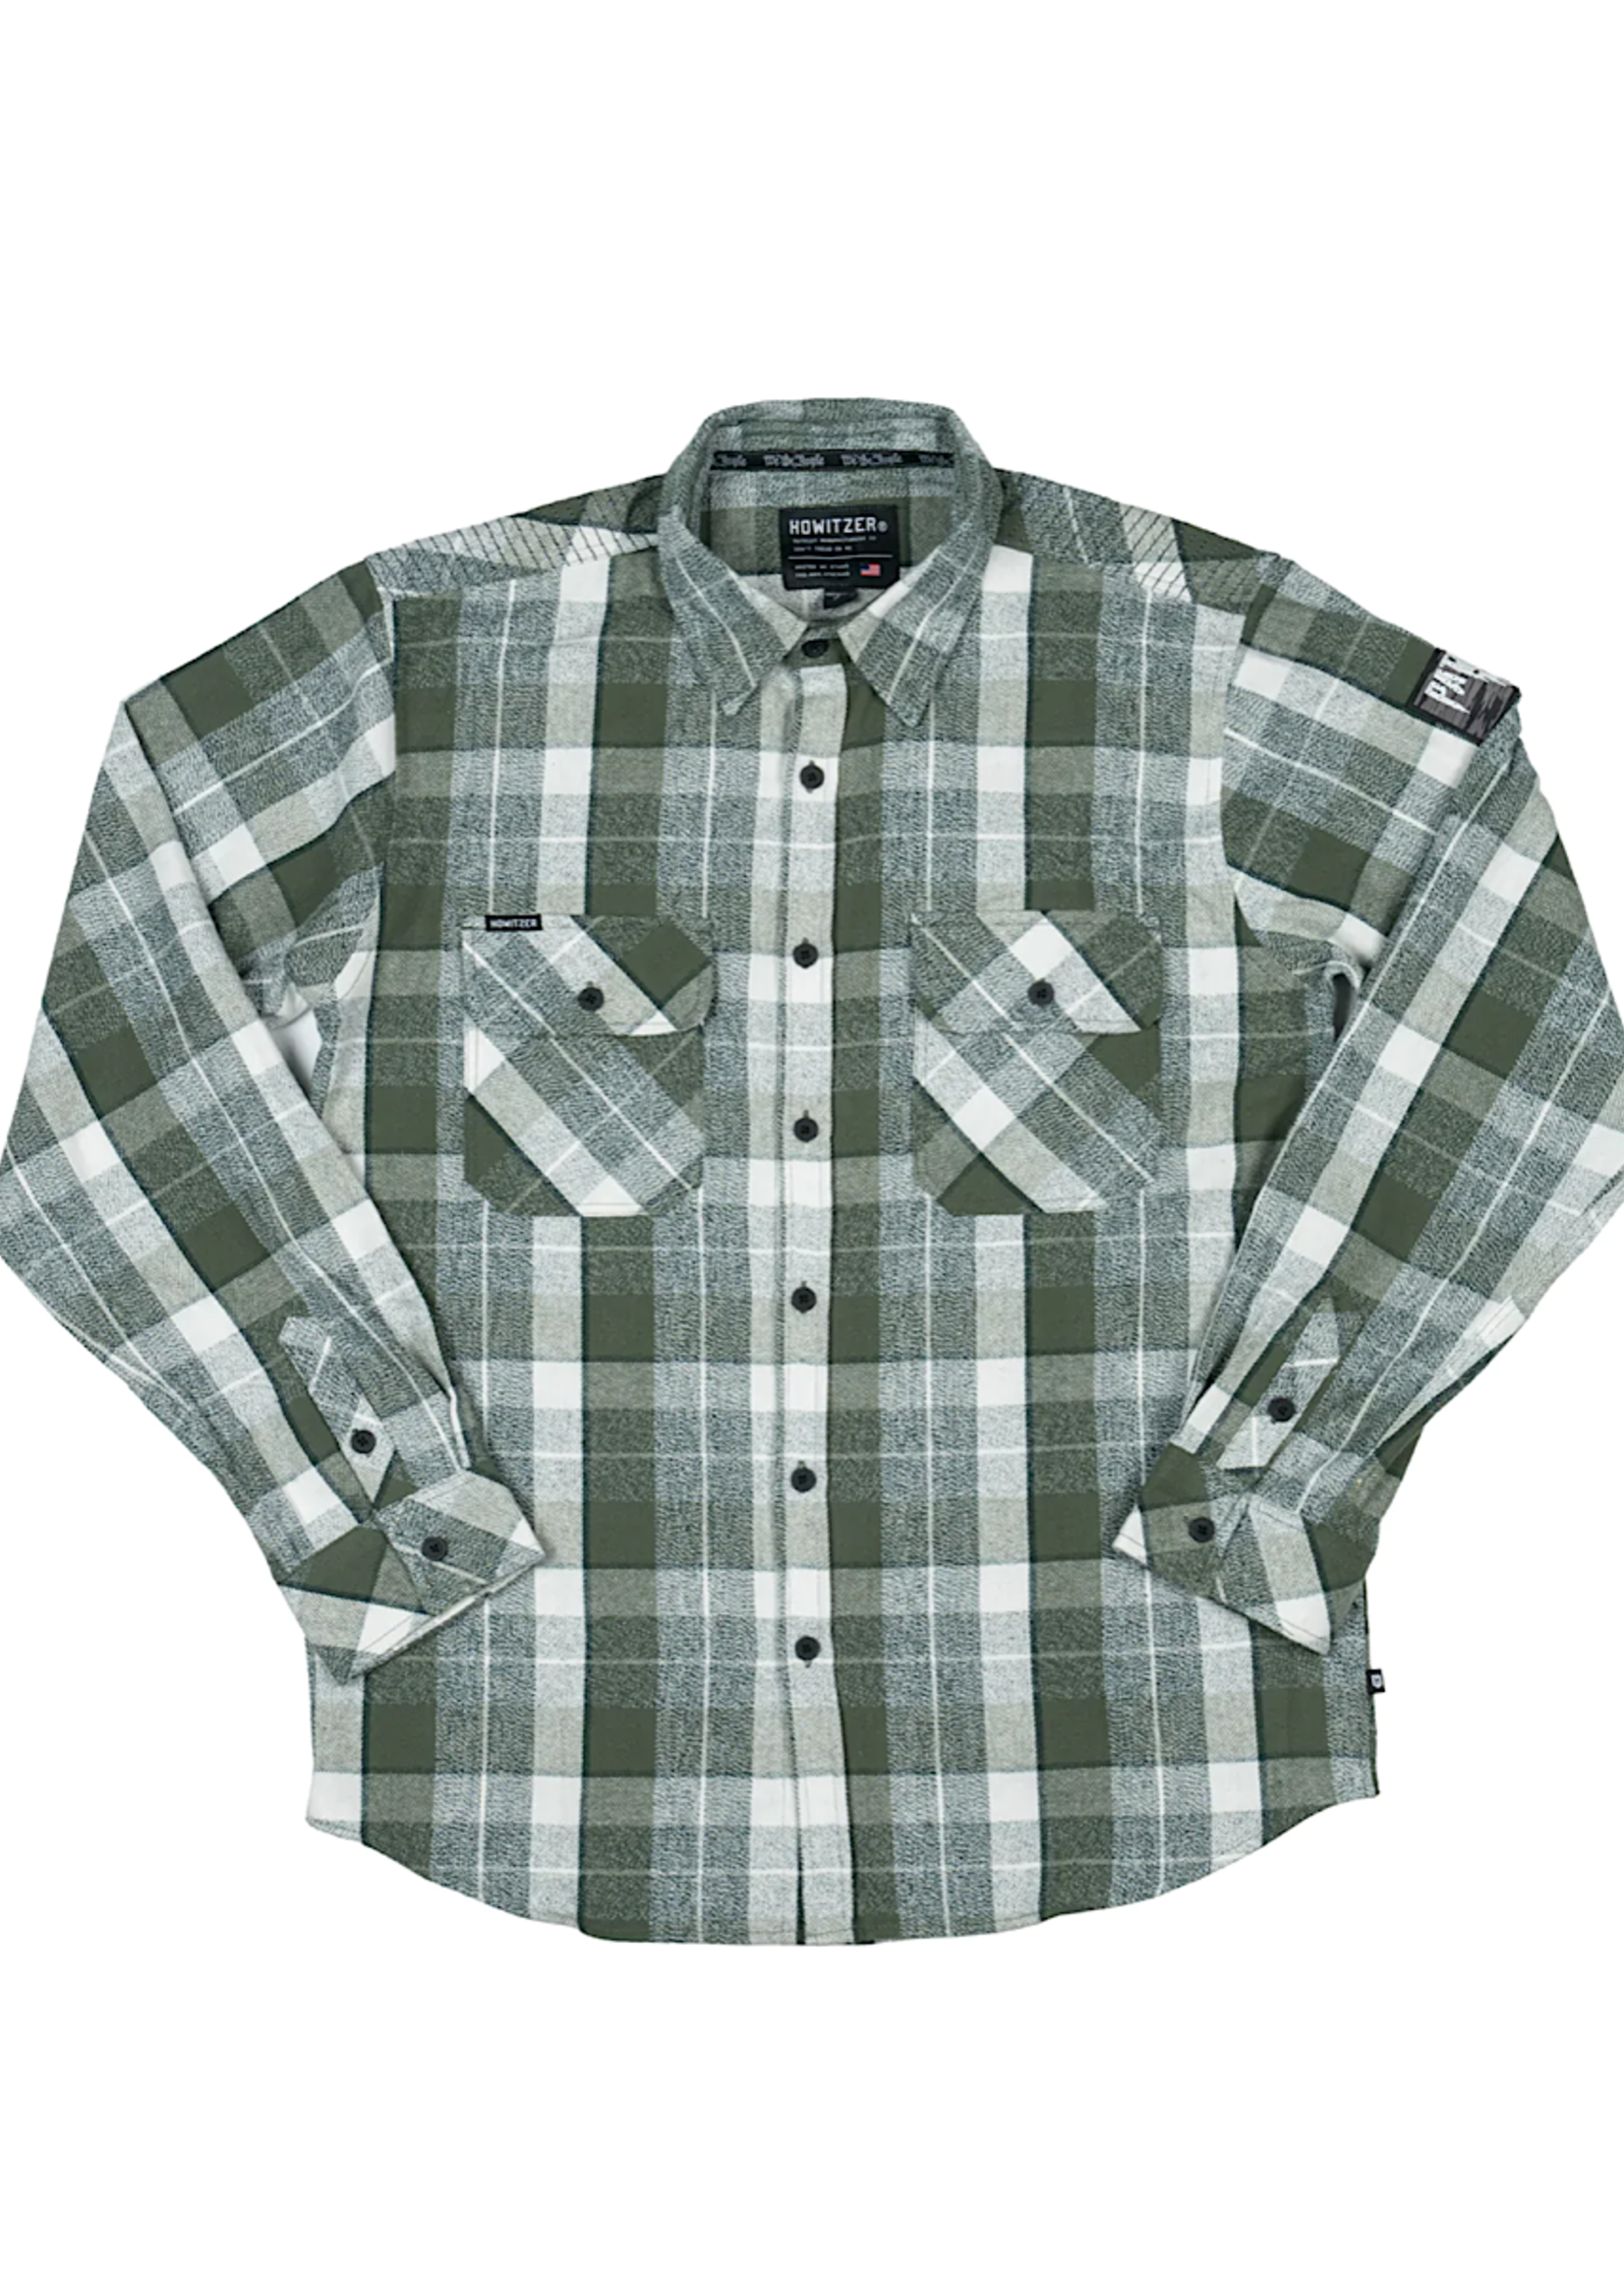 Howitzer Gorge L/S Flannel -Olive Cream